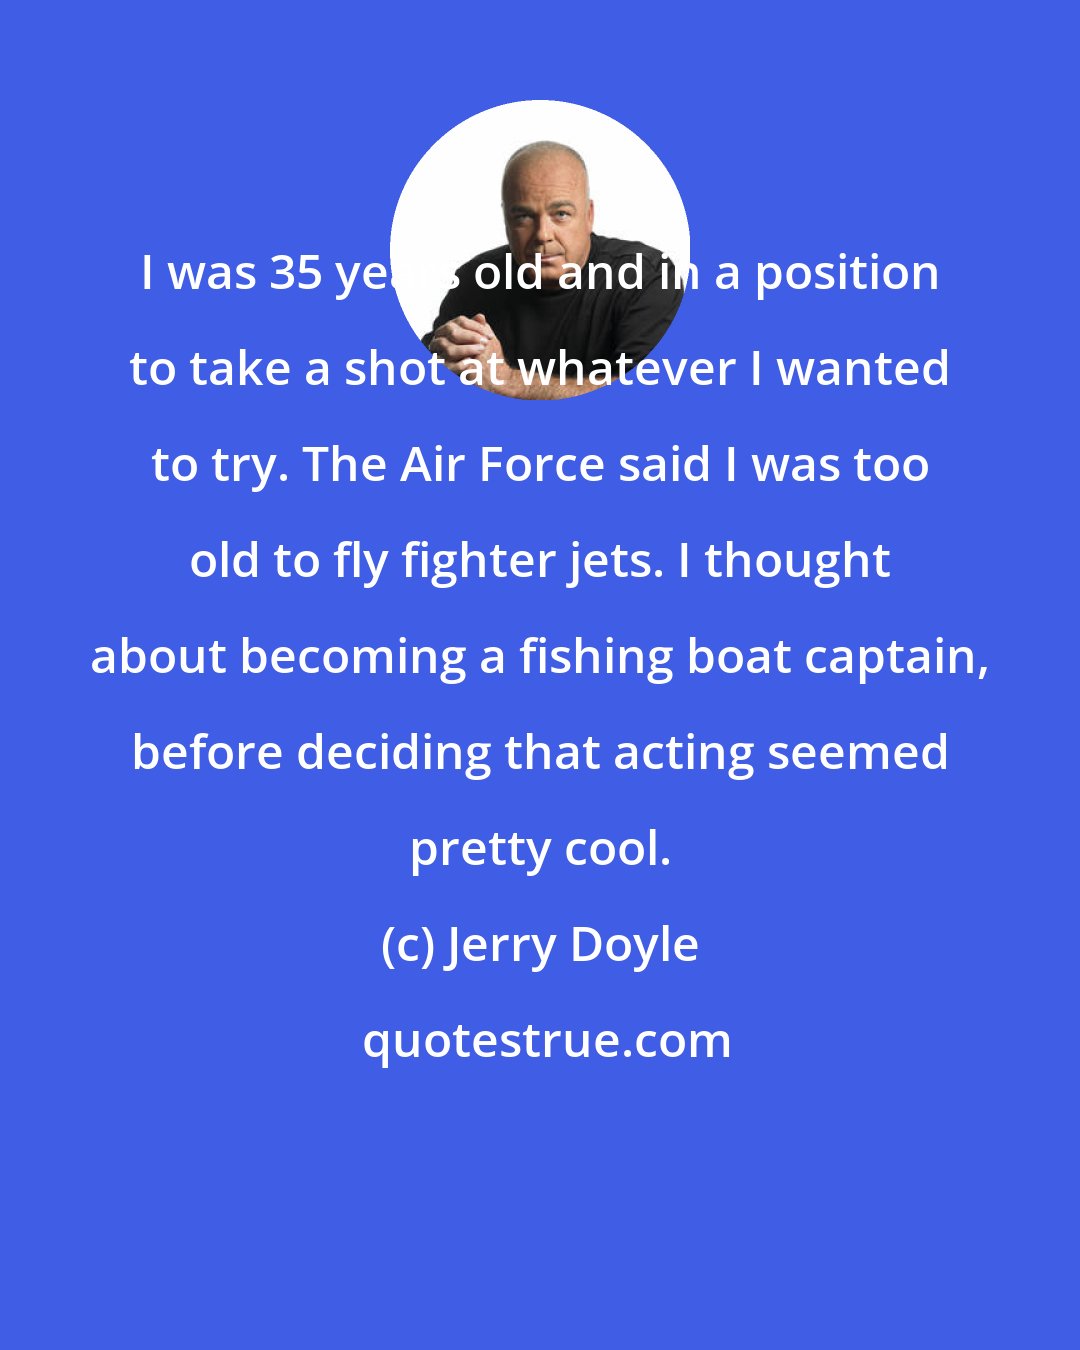 Jerry Doyle: I was 35 years old and in a position to take a shot at whatever I wanted to try. The Air Force said I was too old to fly fighter jets. I thought about becoming a fishing boat captain, before deciding that acting seemed pretty cool.